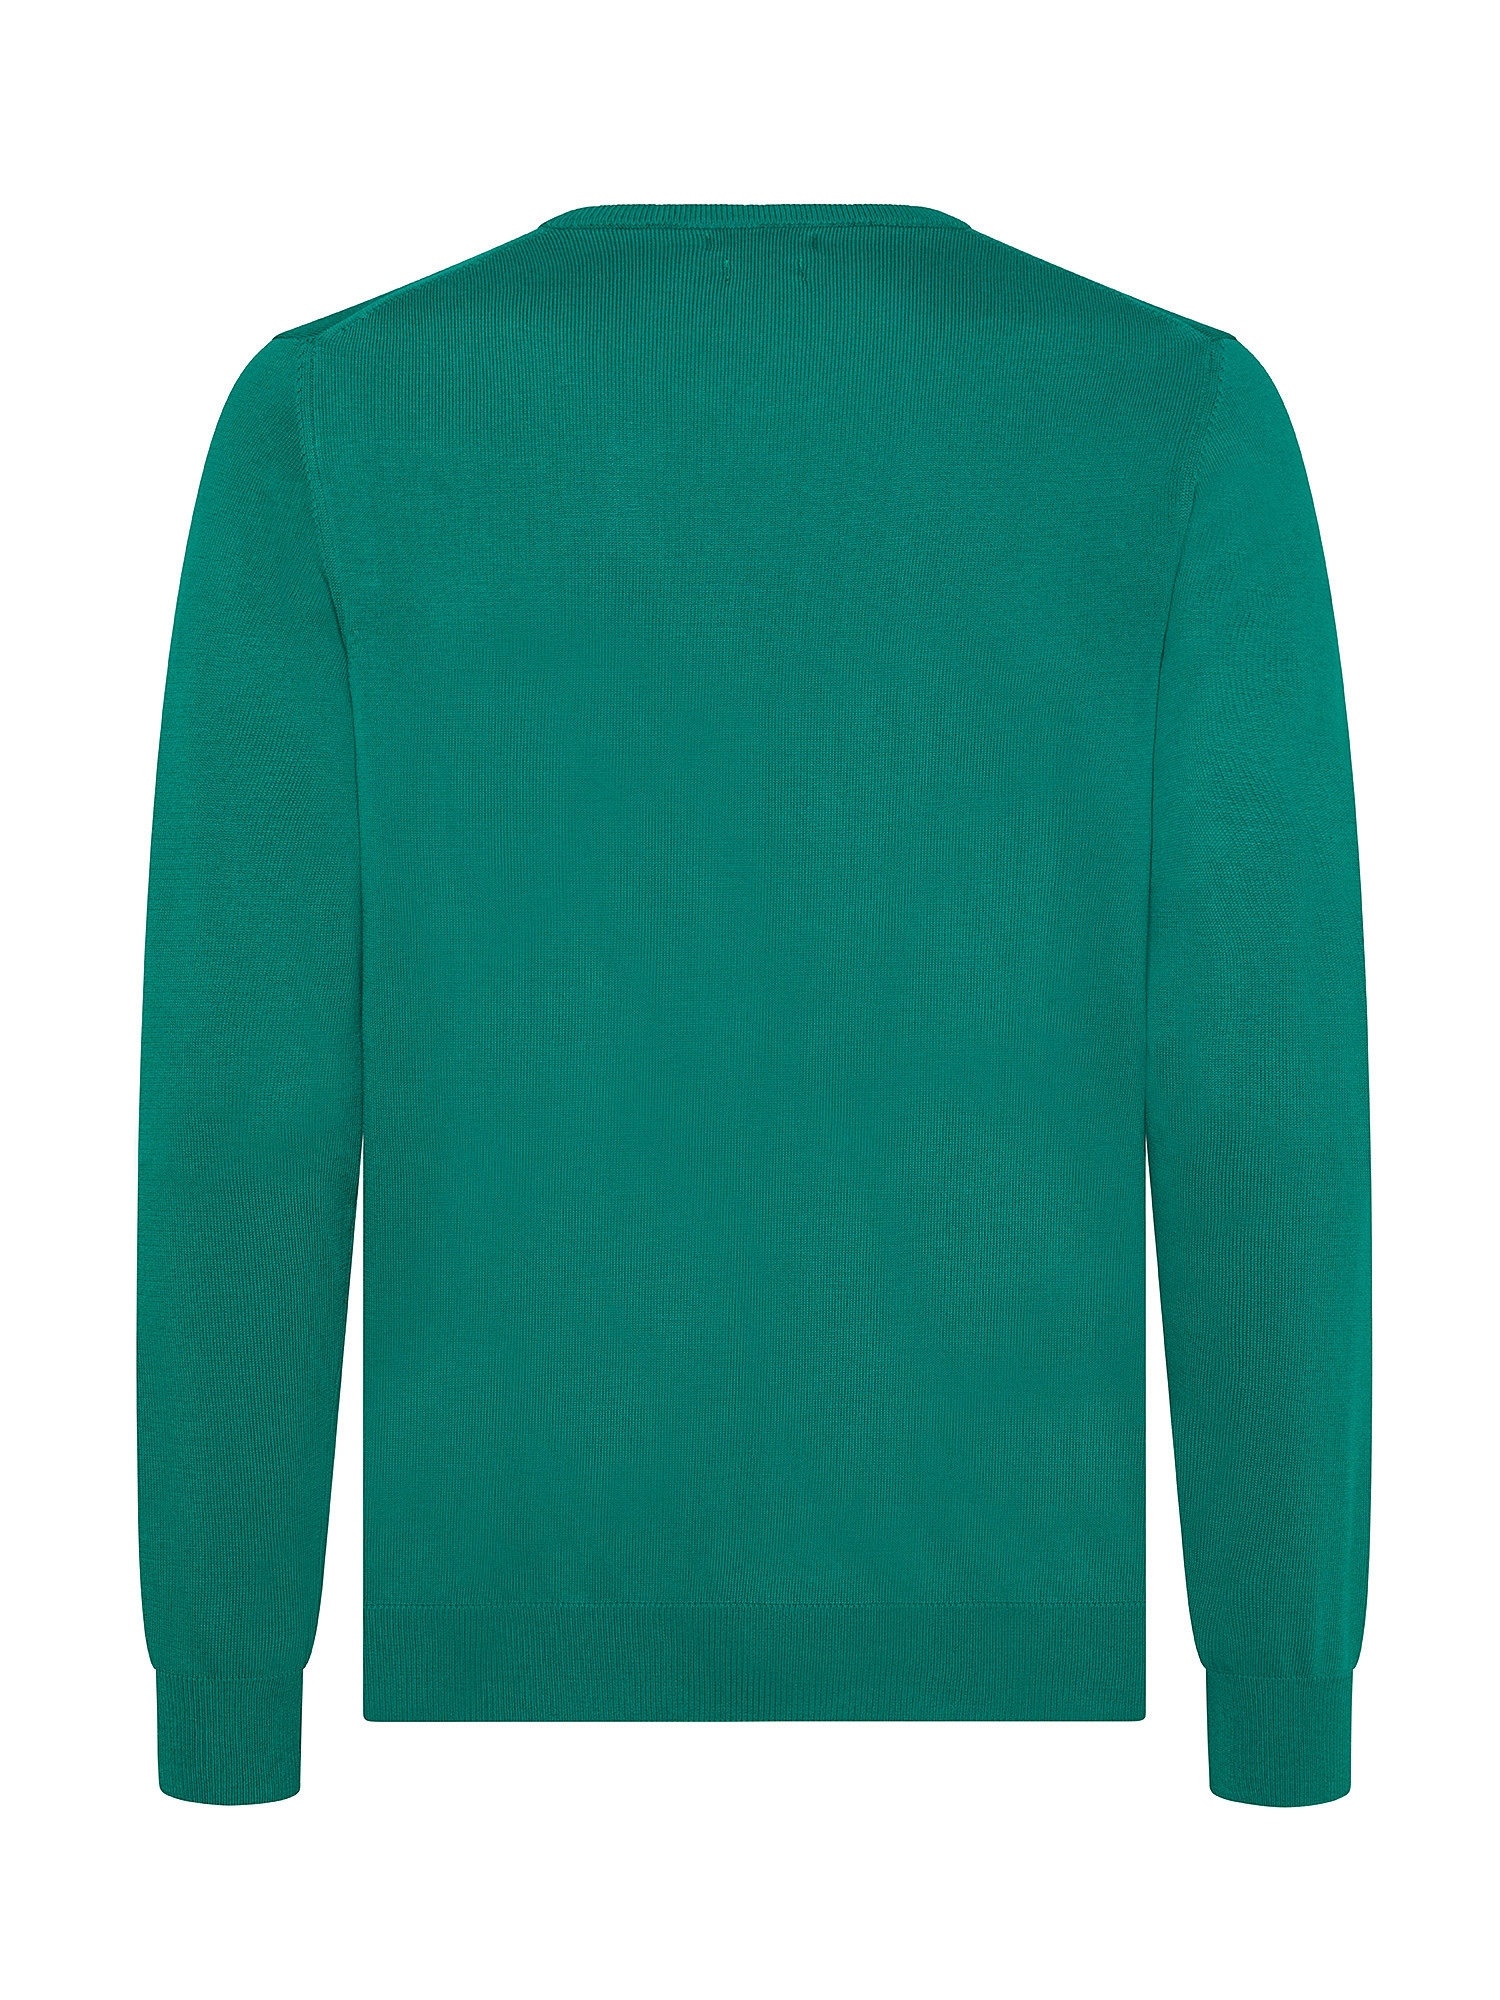 Luca D'Altieri - Crew neck sweater in extrafine pure cotton, Green, large image number 1